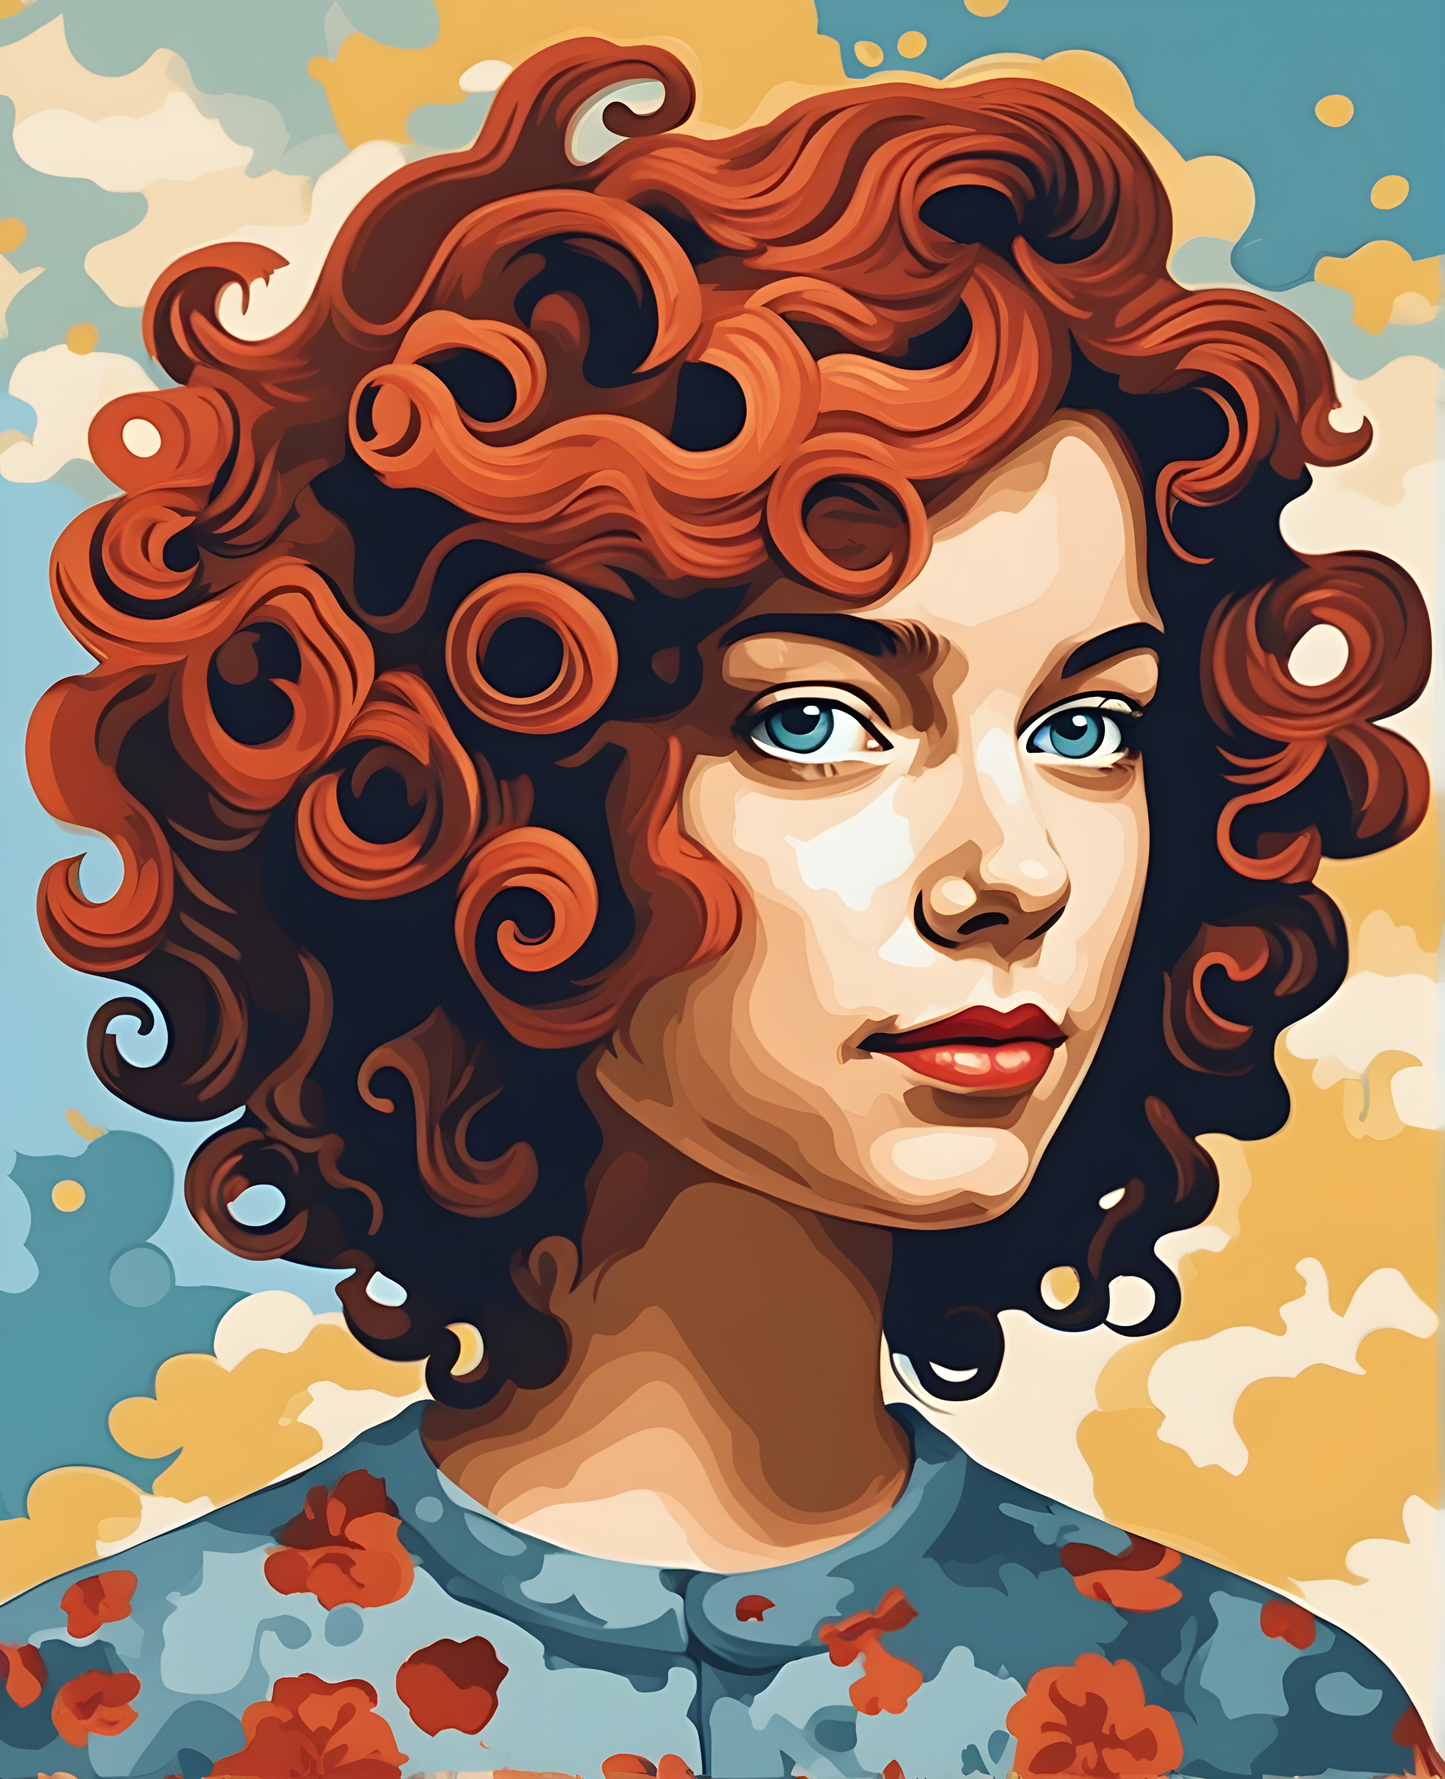 Girl with Curls (3) - Van-Go Paint-By-Number Kit